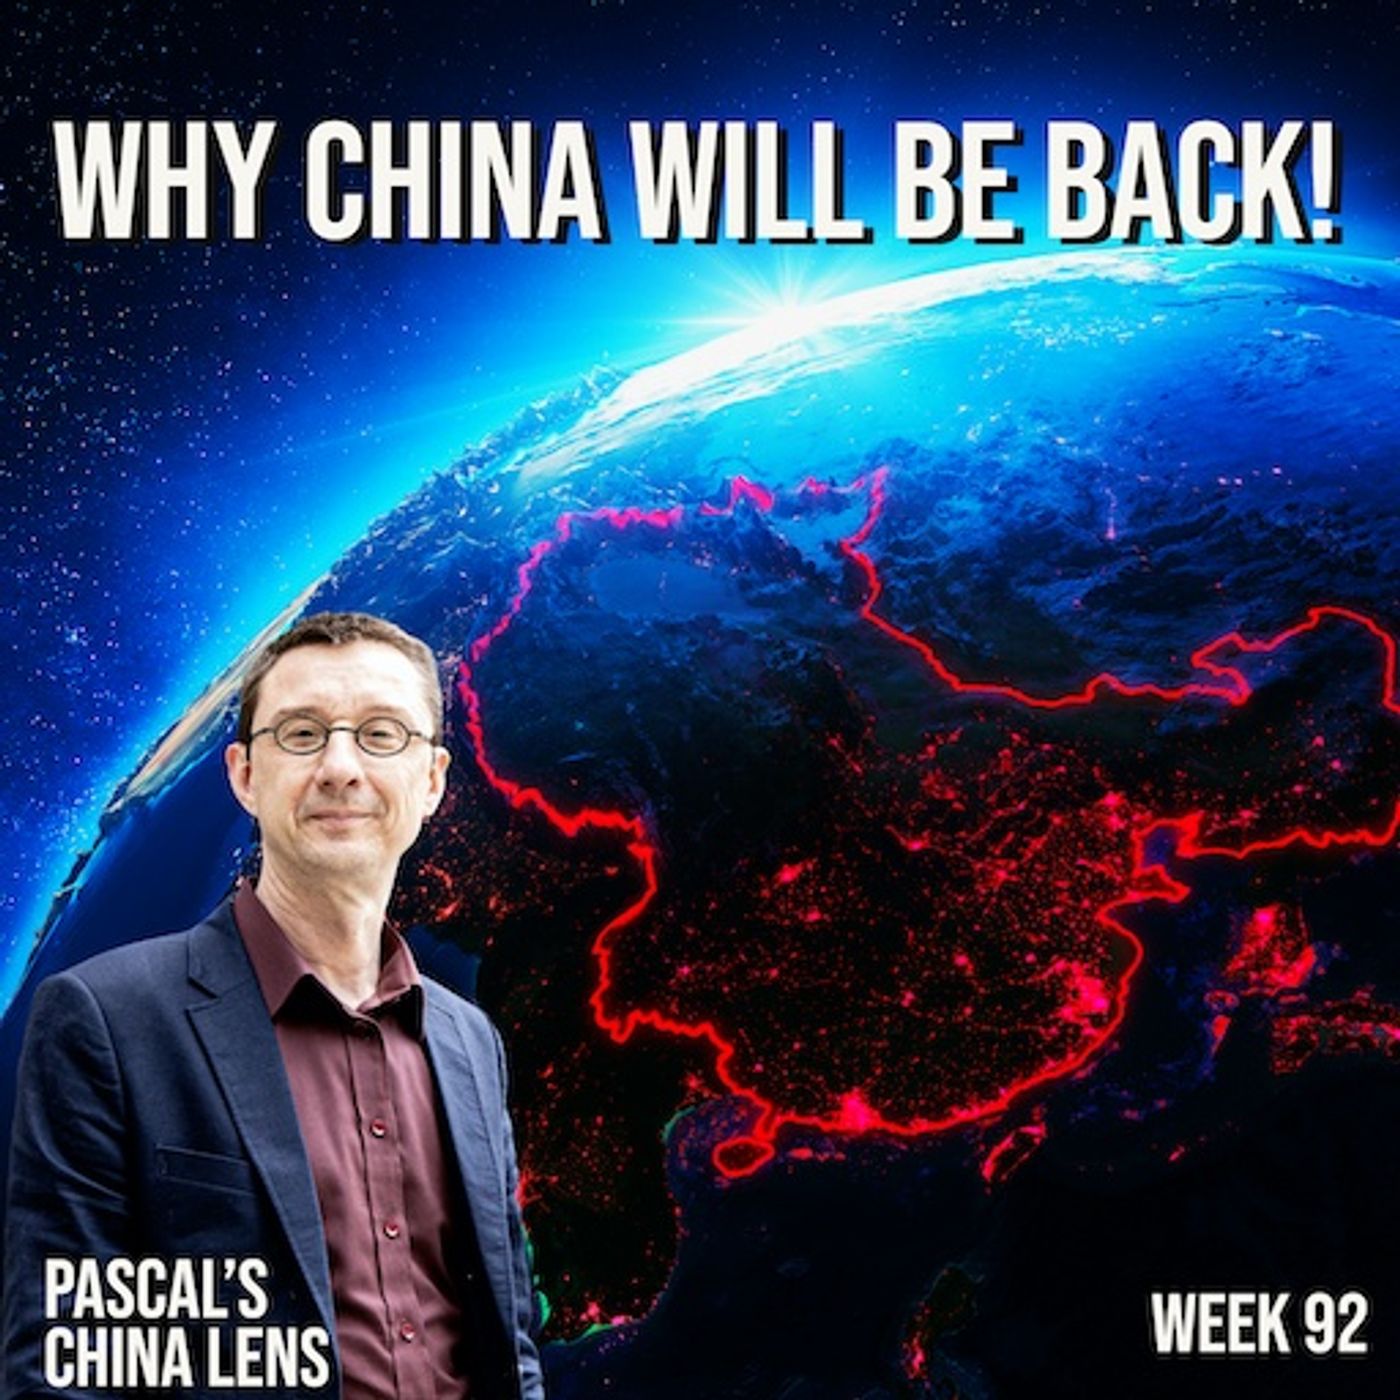 Why China will be back!